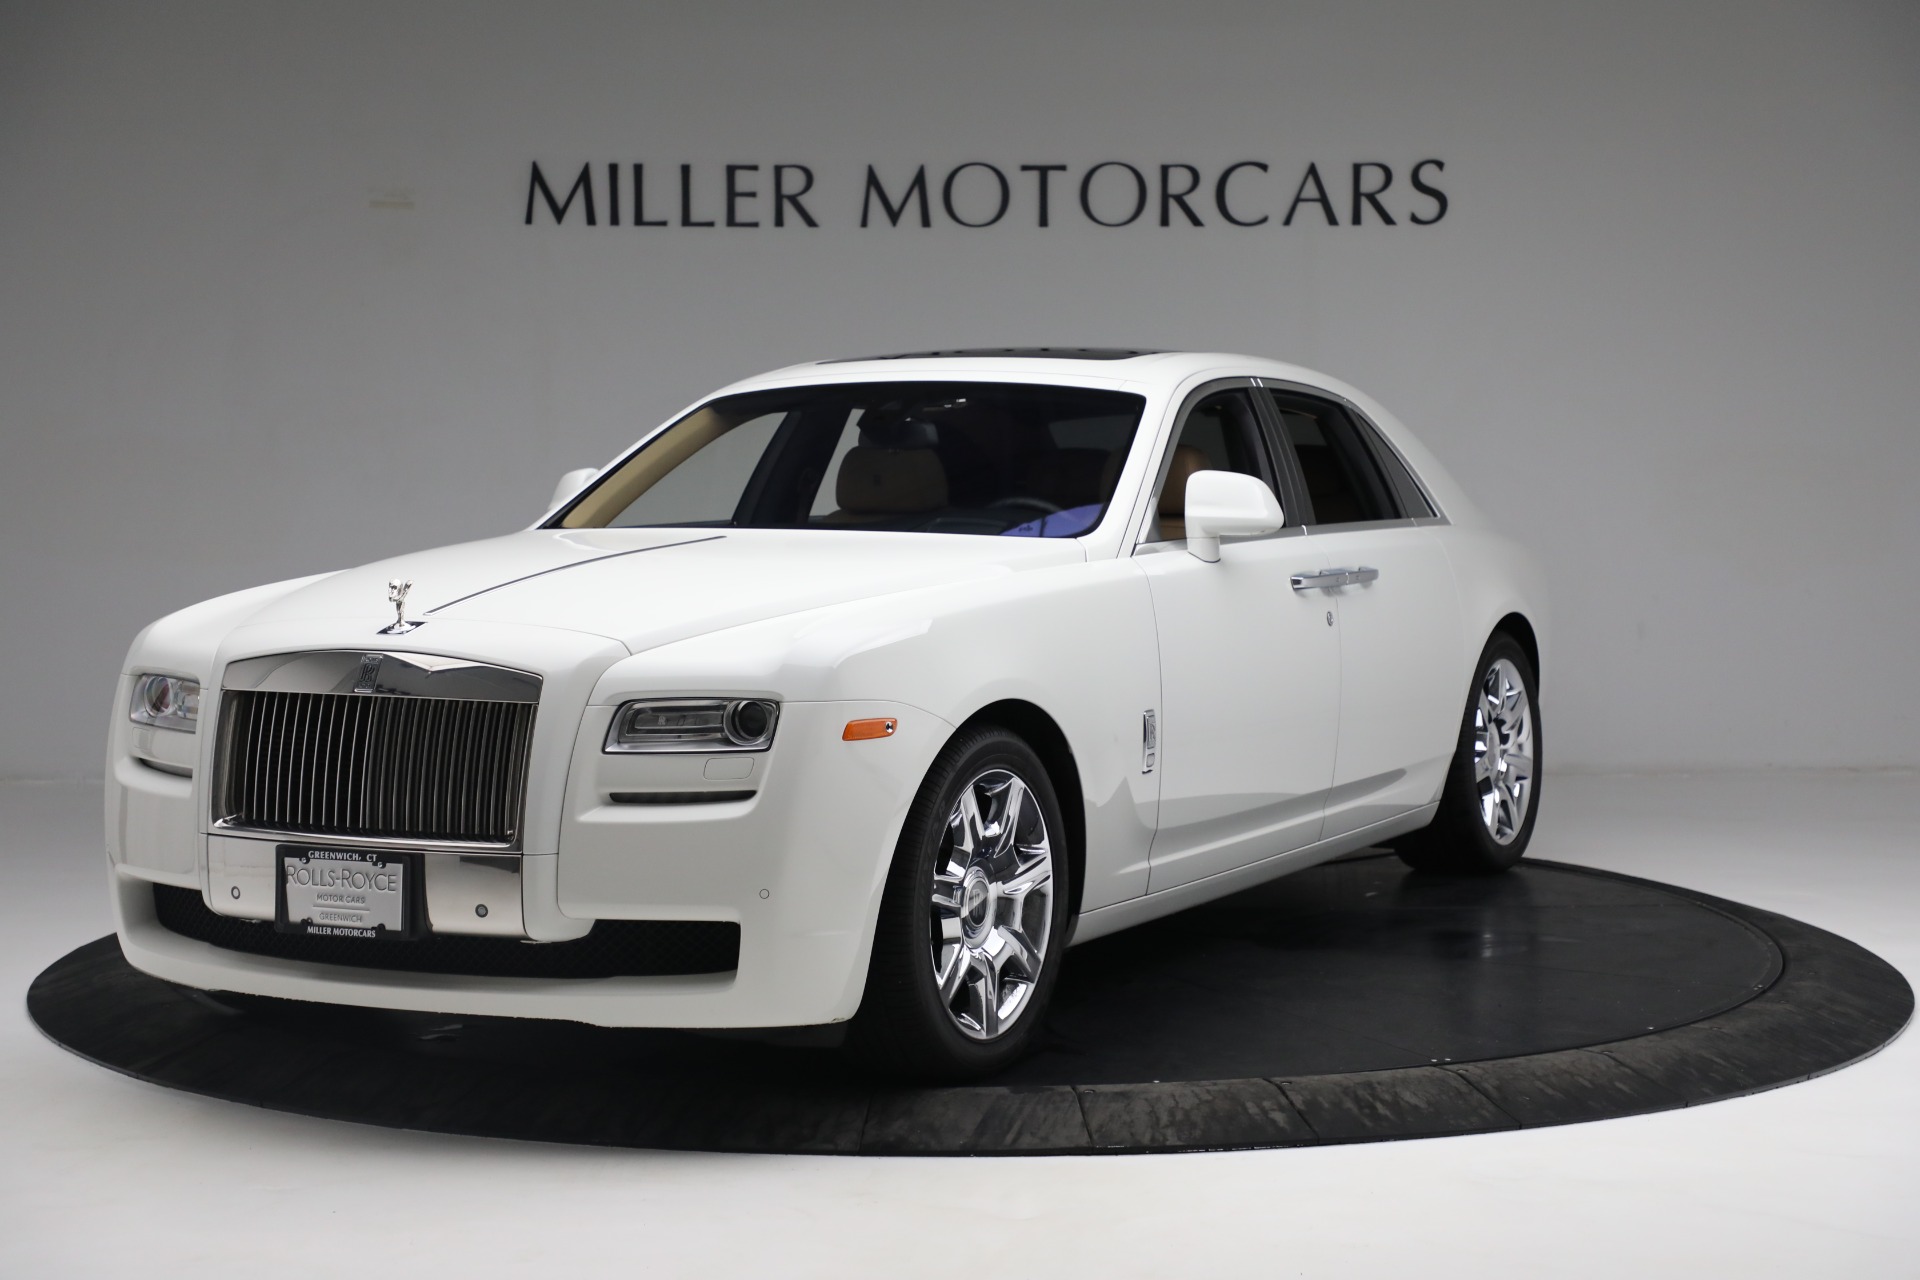 Used 2013 Rolls-Royce Ghost for sale Call for price at Pagani of Greenwich in Greenwich CT 06830 1